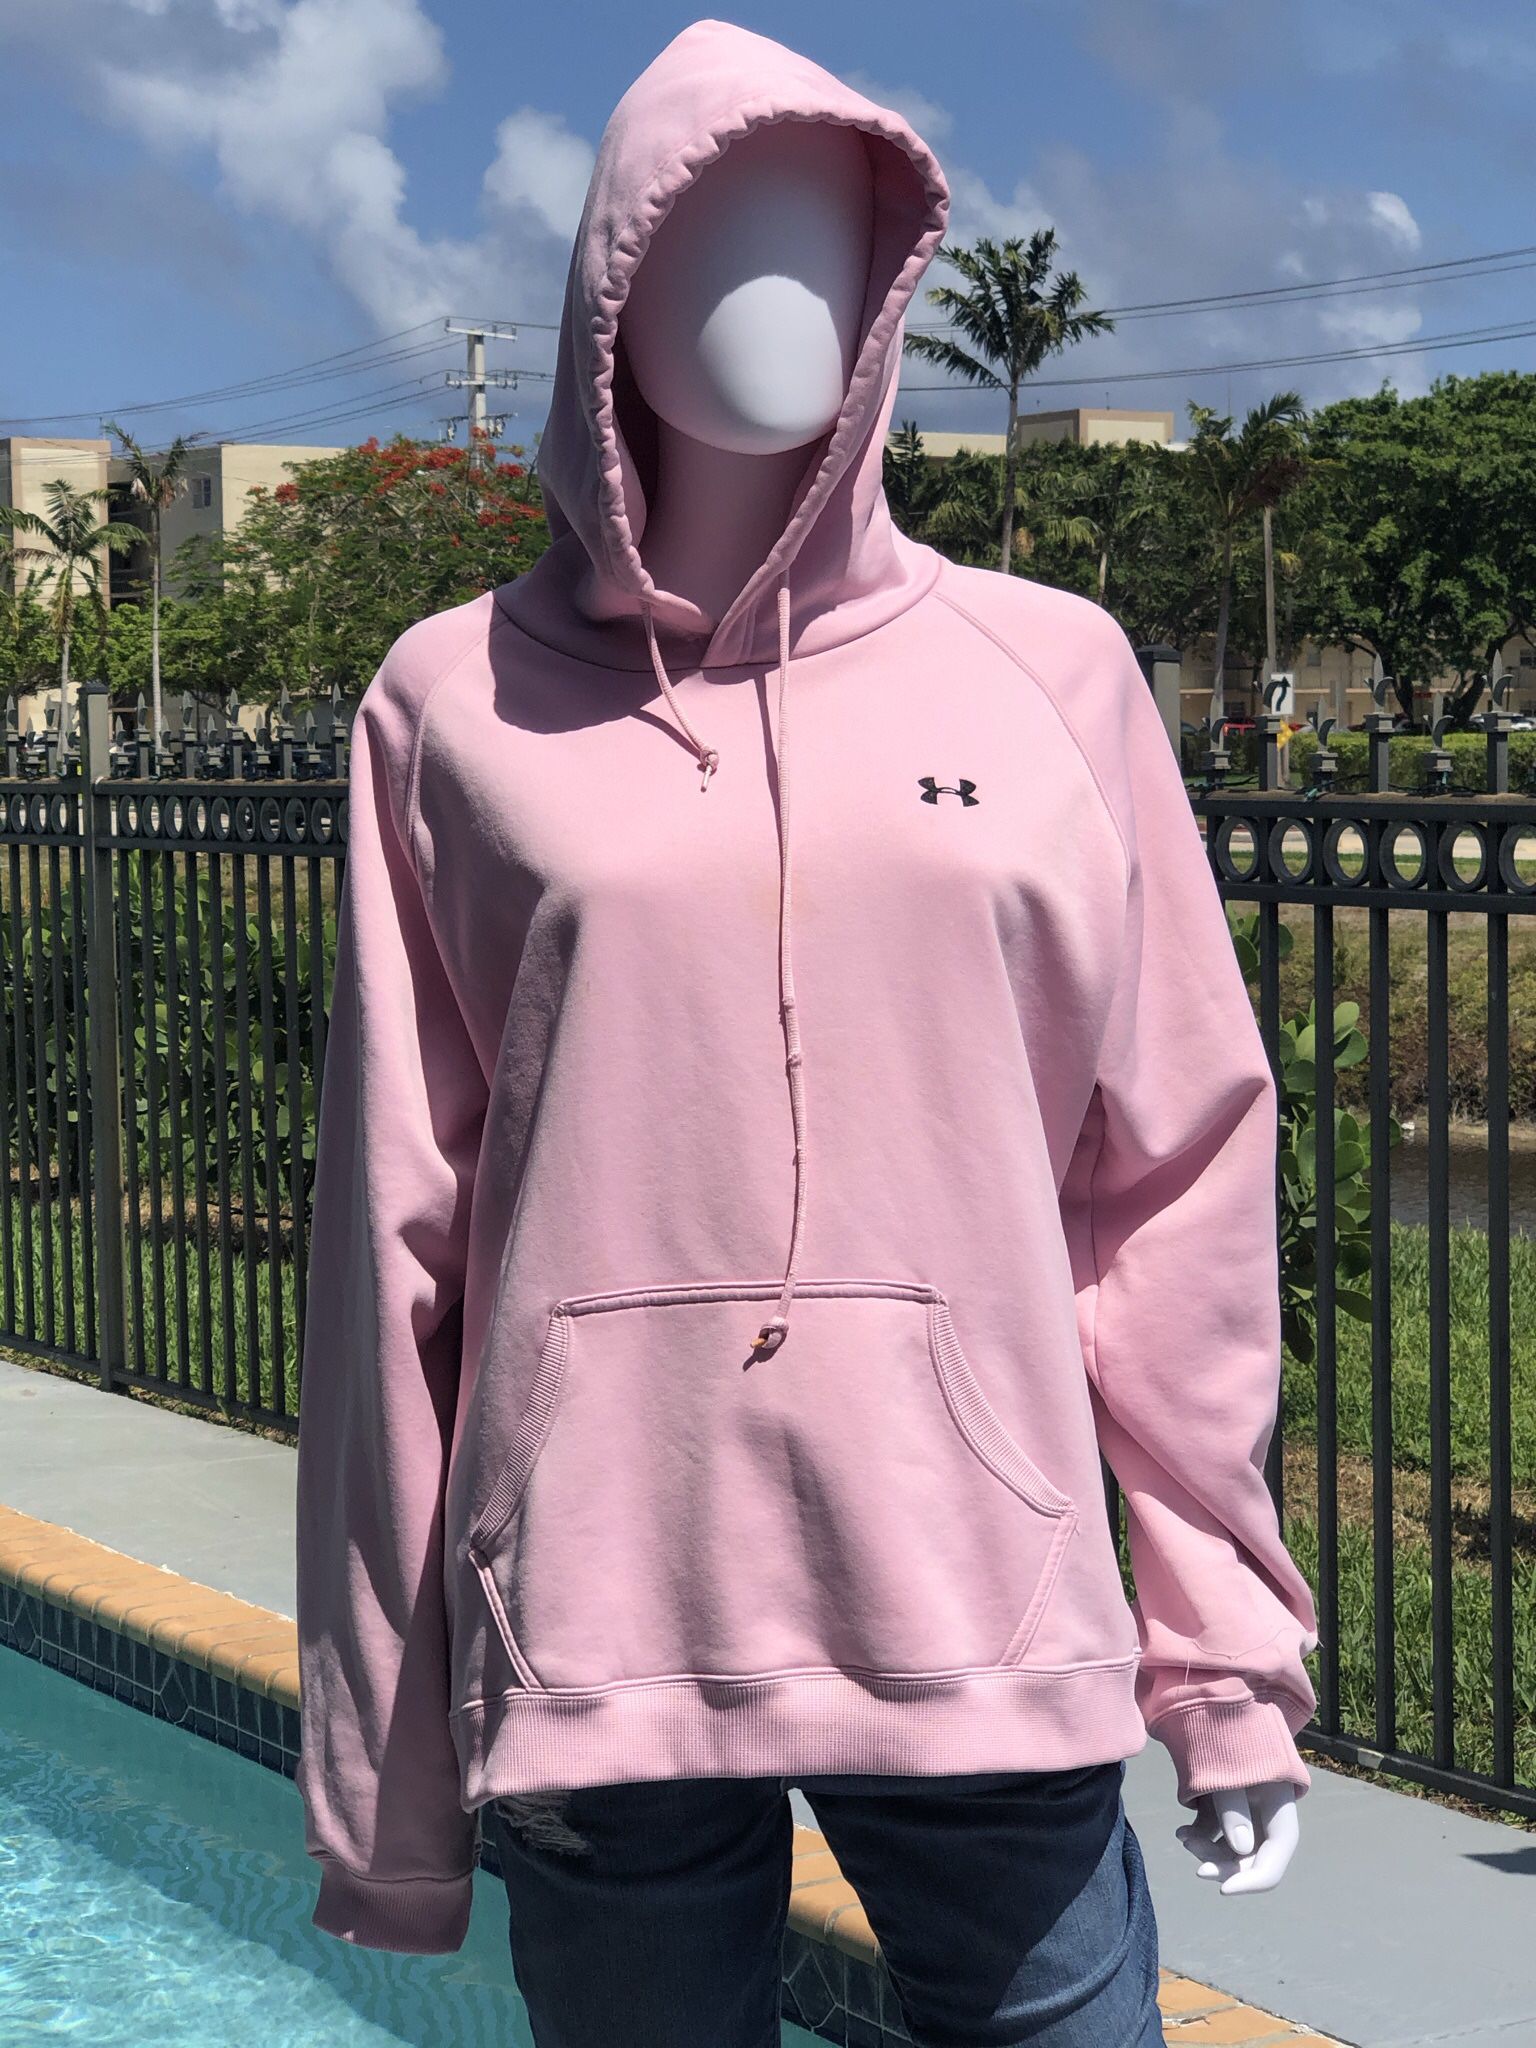 Champion Pink Sweatshirt-Great For Breast Cancer Awareness